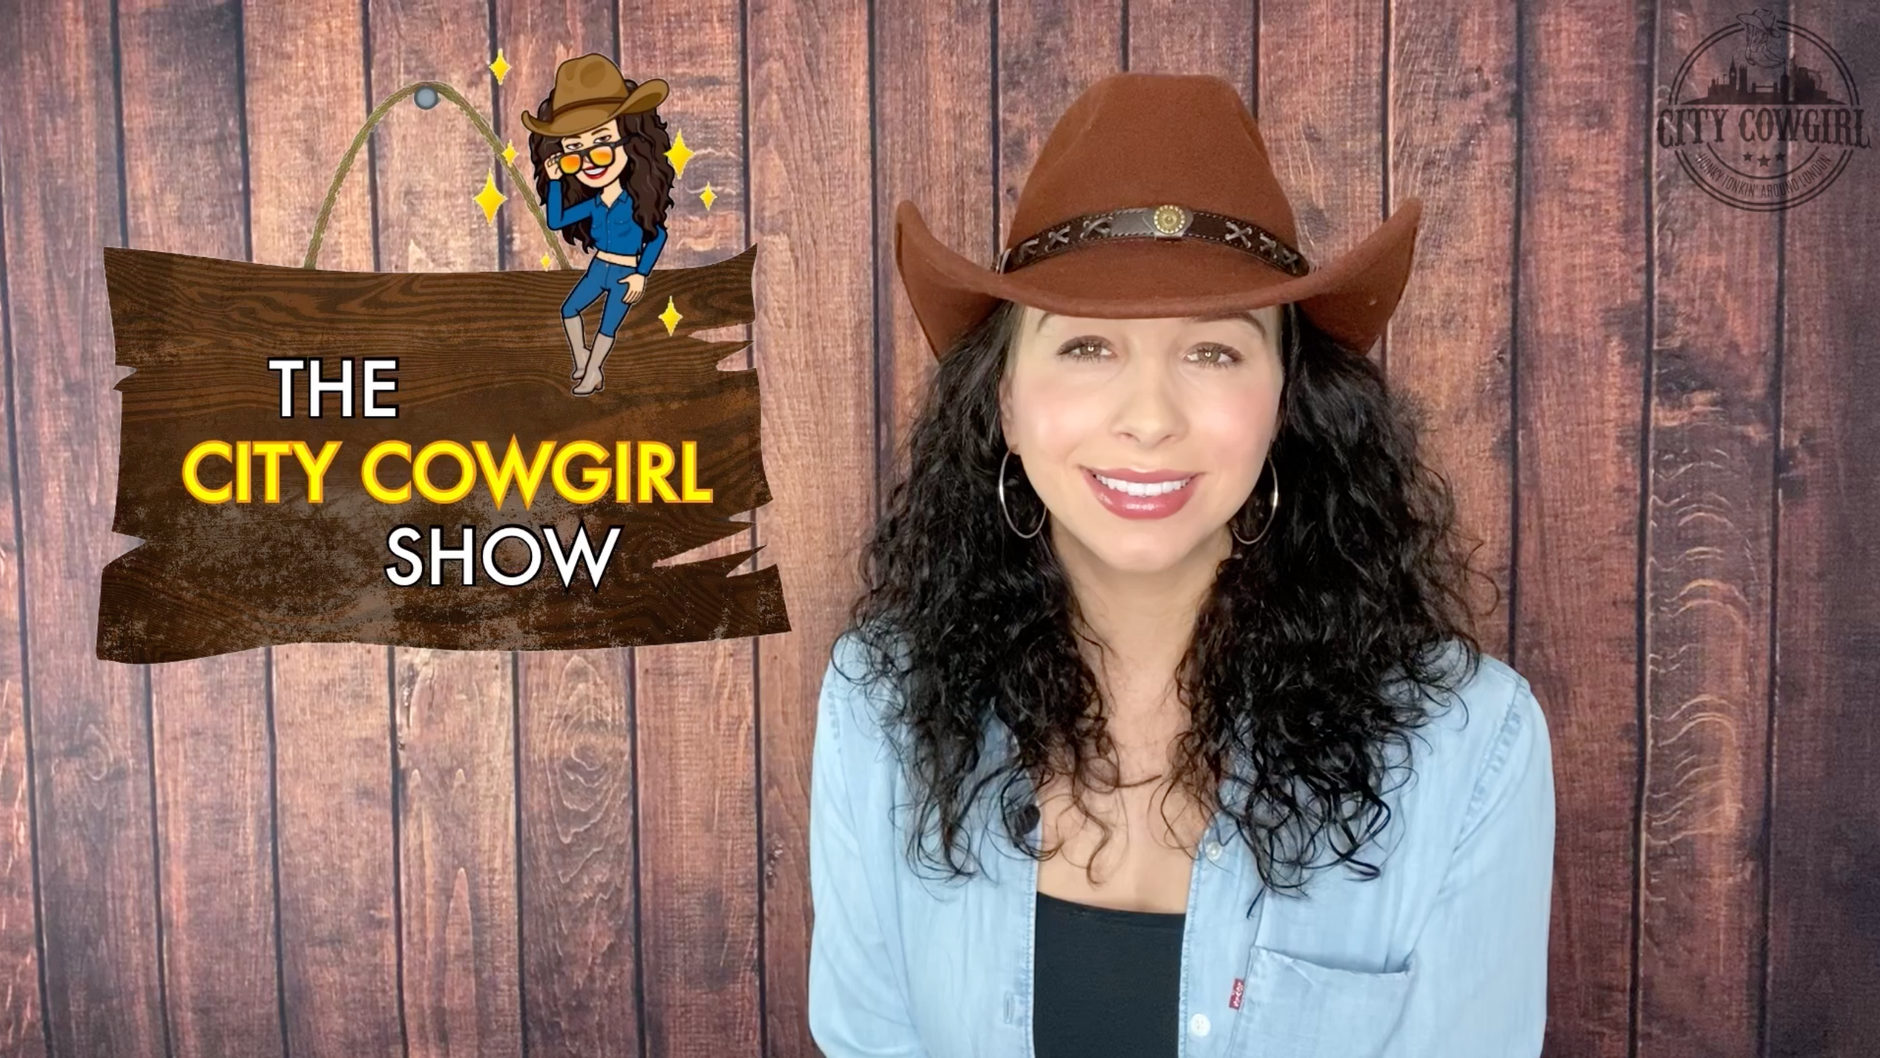 The City Cowgirl Show